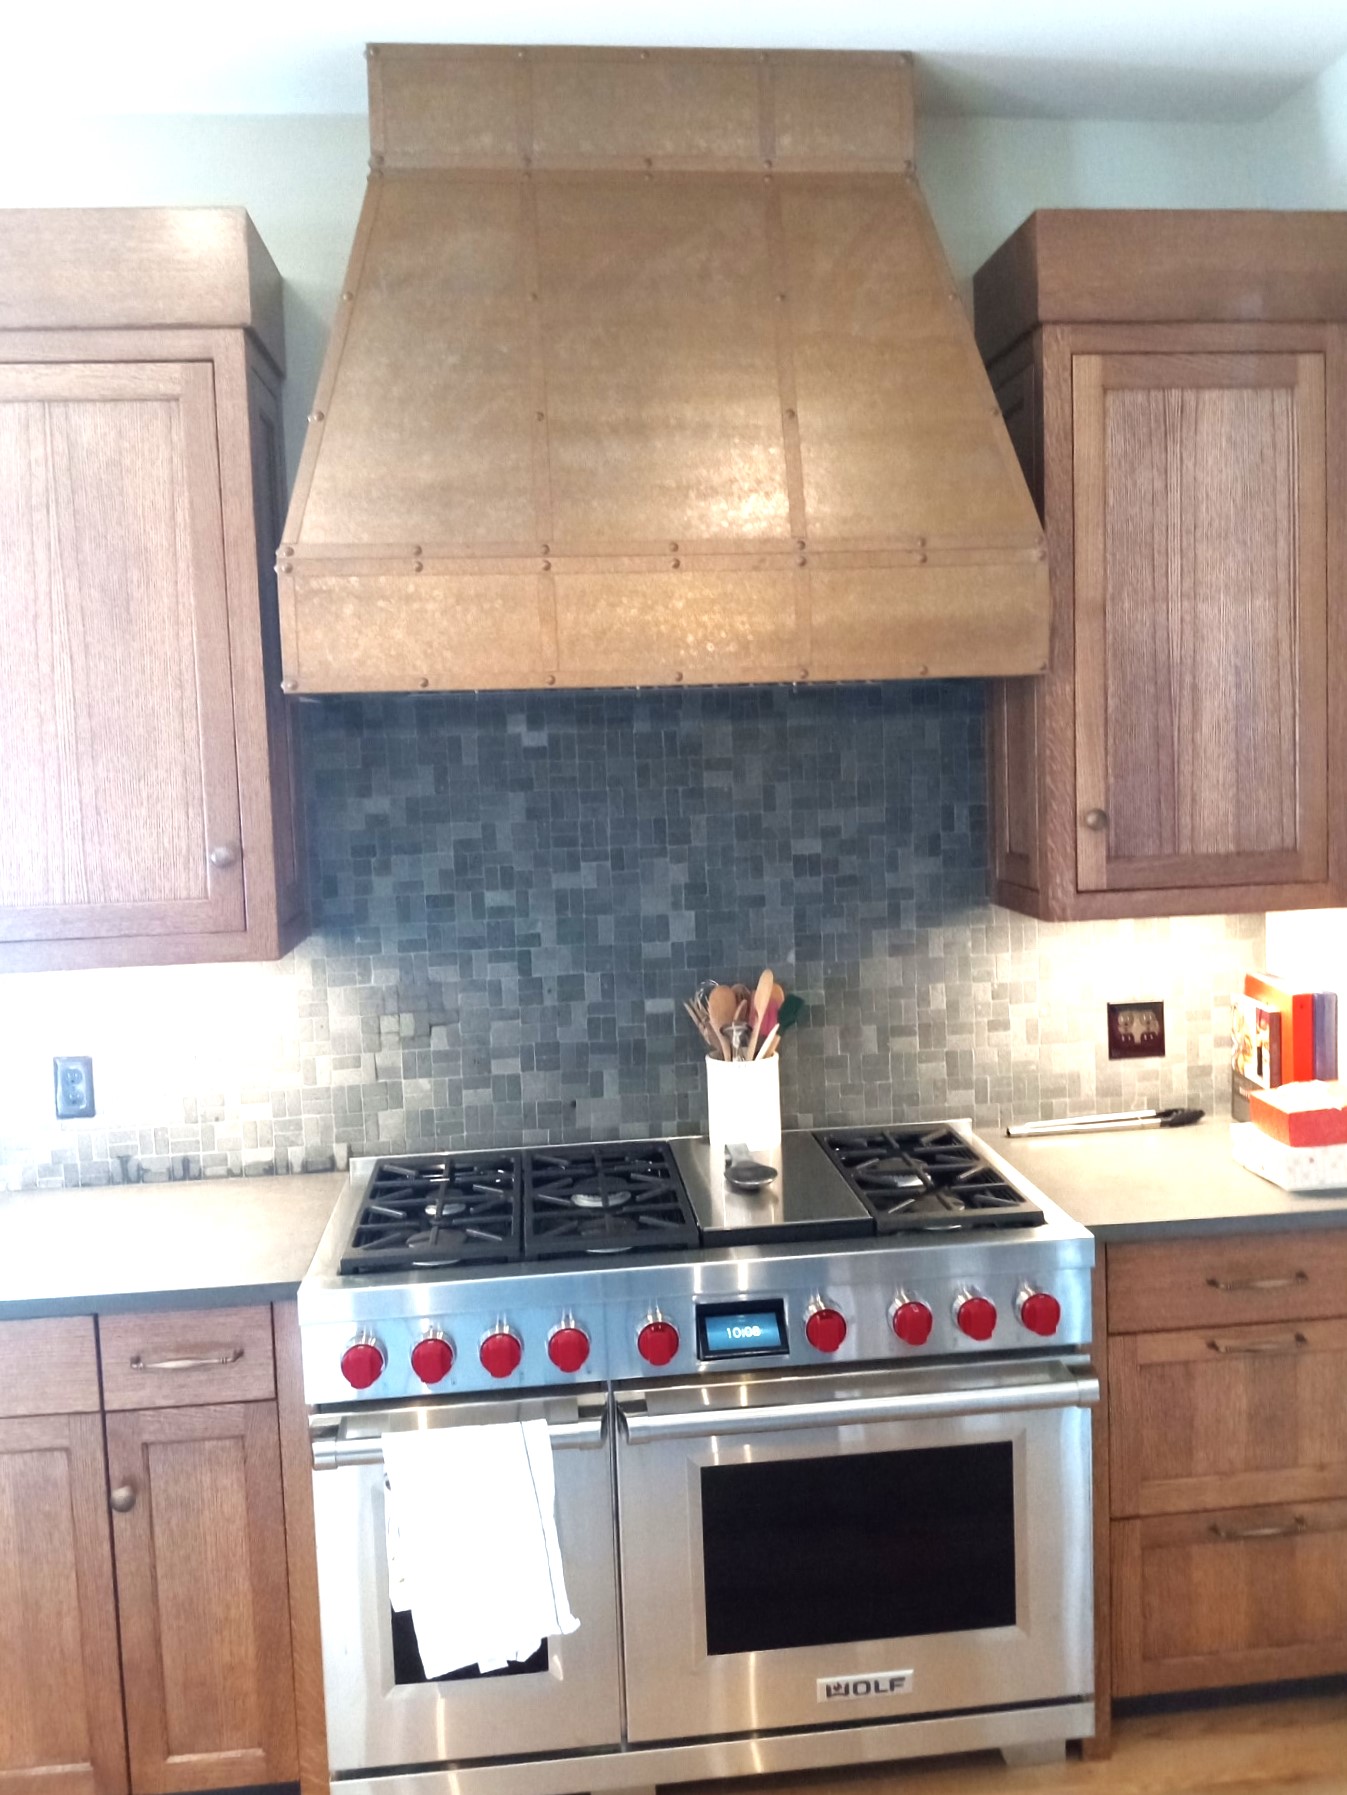 CopperSmith Modern MX3 Wall Mount Weathered Copper Range Hood with Straps and Rivets in a traditional kitchen with brick backsplash wood cabites and marble countertops